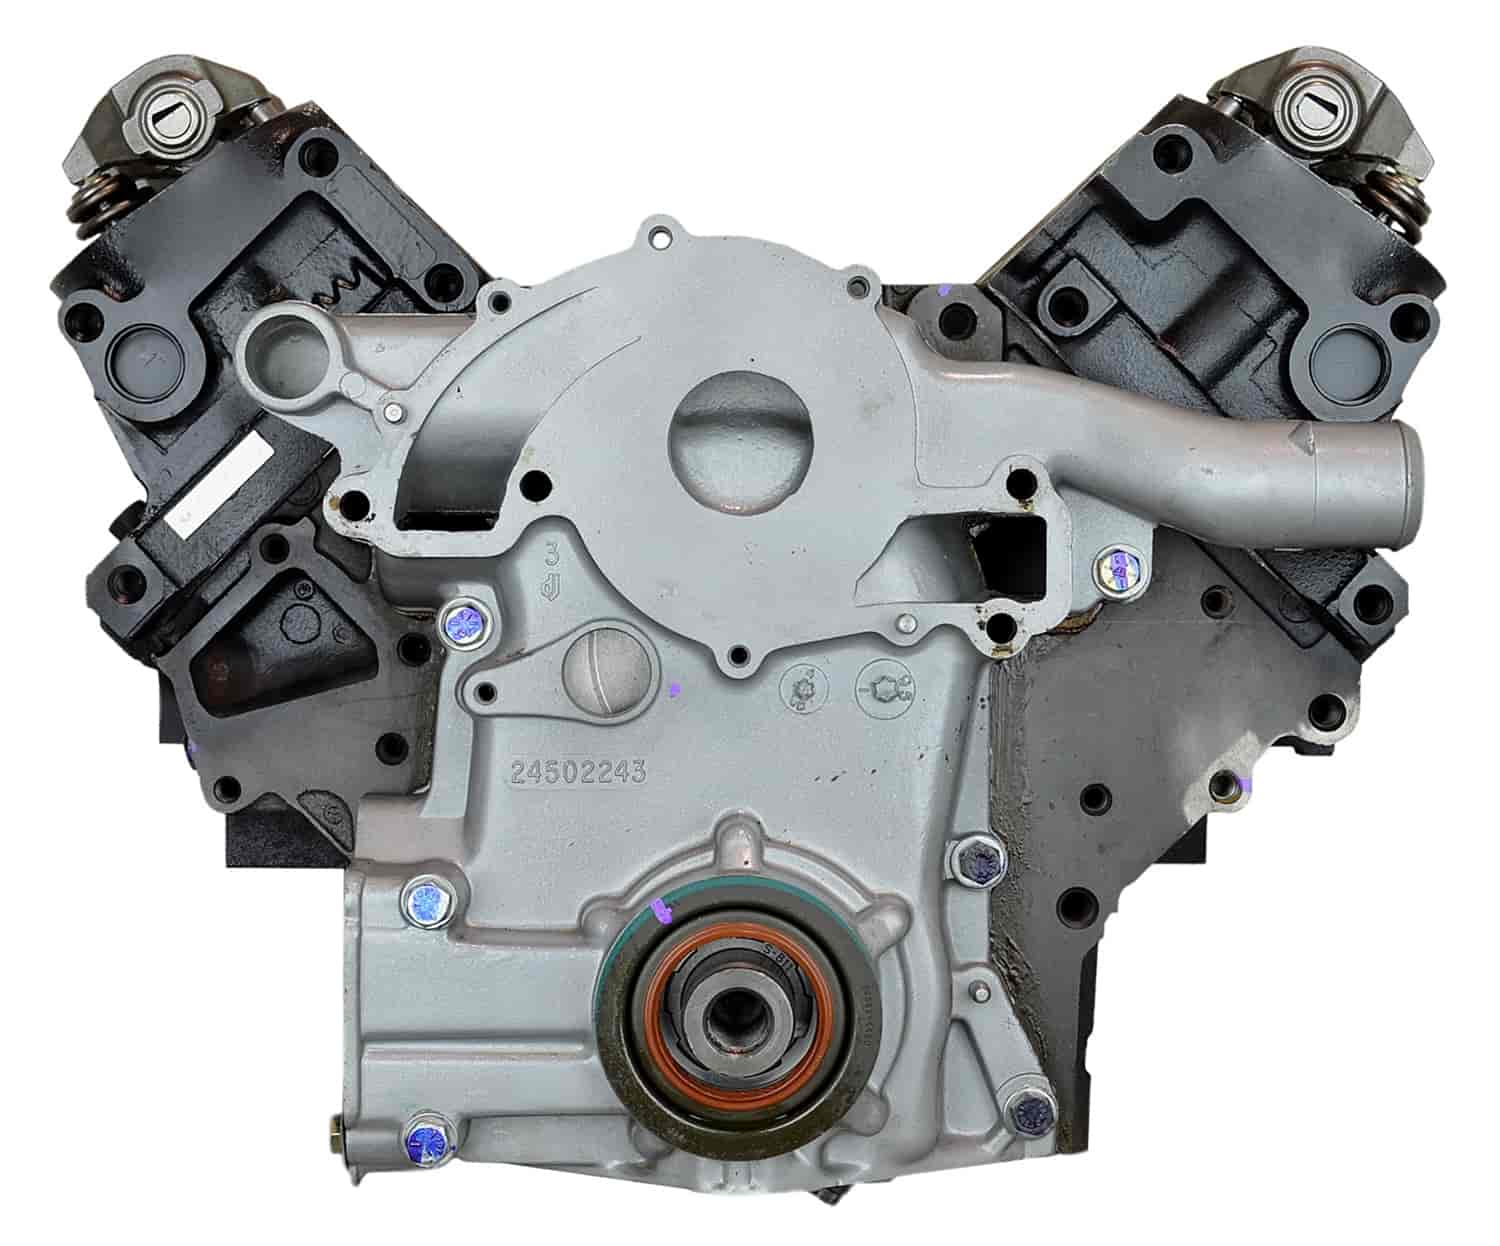 Remanufactured Crate Engine for 1995-1996 Chevy/Buick/Olds/Pontiac with 3.8L V6